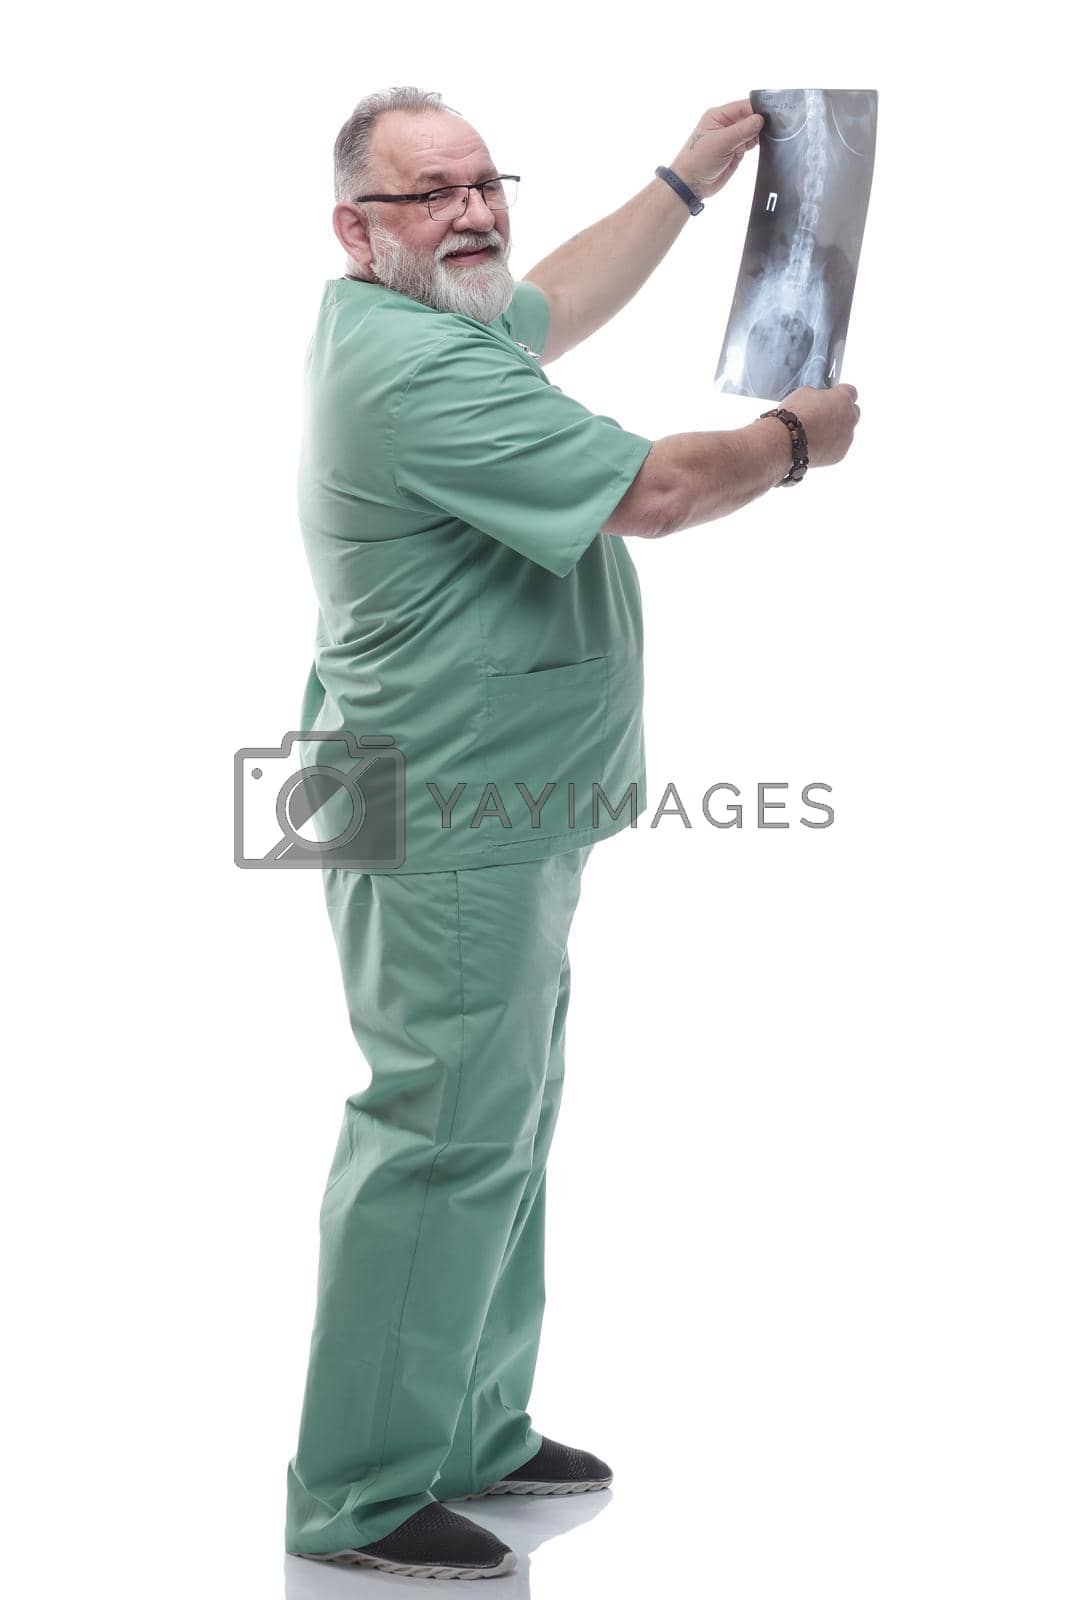 Royalty free image of in full growth. an experienced doctor looking at an x- ray of a patient by asdf